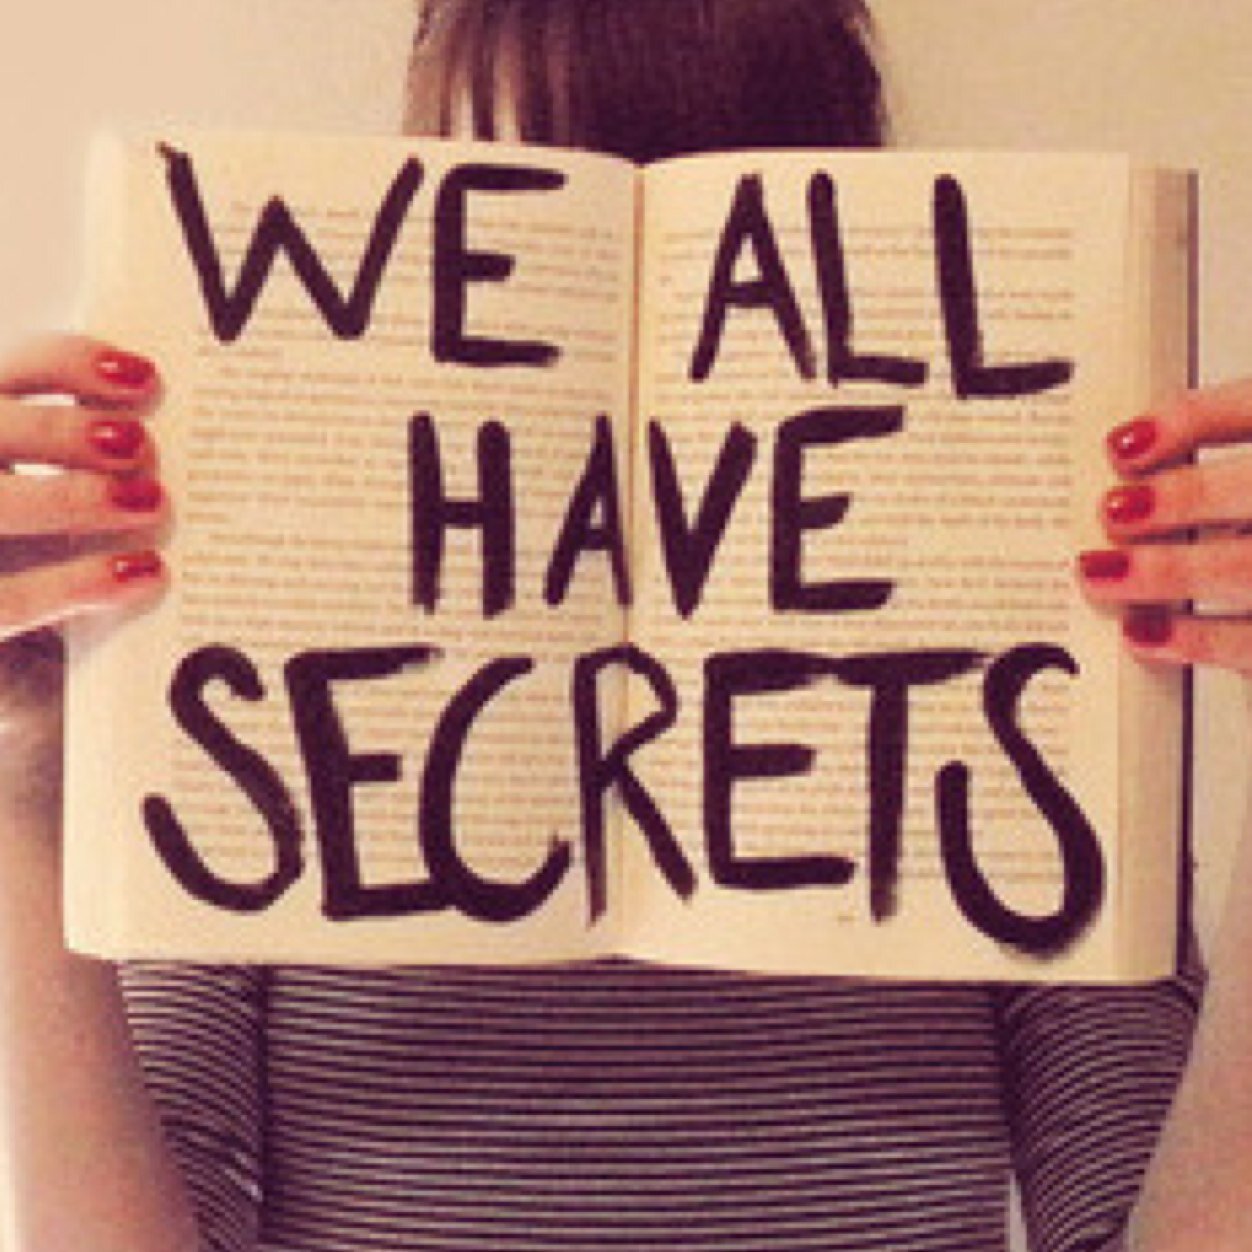 Send us your confessions and secrets that go around your school.  (All users will remain anonymous, and will not post pictures or names) http://t.co/o5tNOlydoF